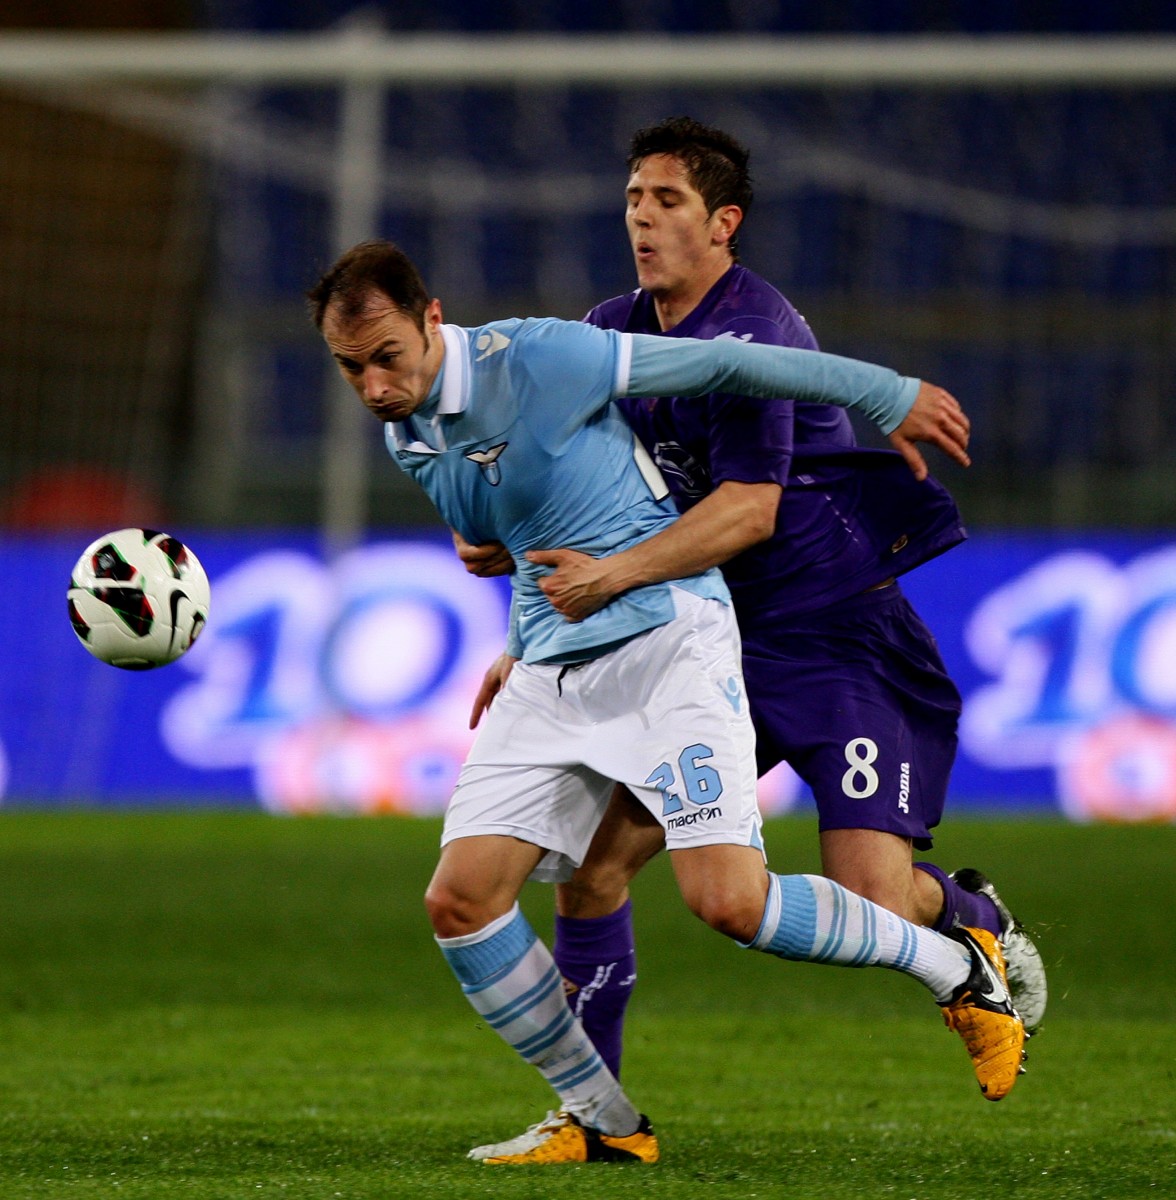 Fiorentina goal scorer Stevan Jovetic holds back Lazio's Stefan Radu in Serie A action at Stadio Olimpico in Rome on Mar. 10. (Paolo Bruno/Getty Images) 